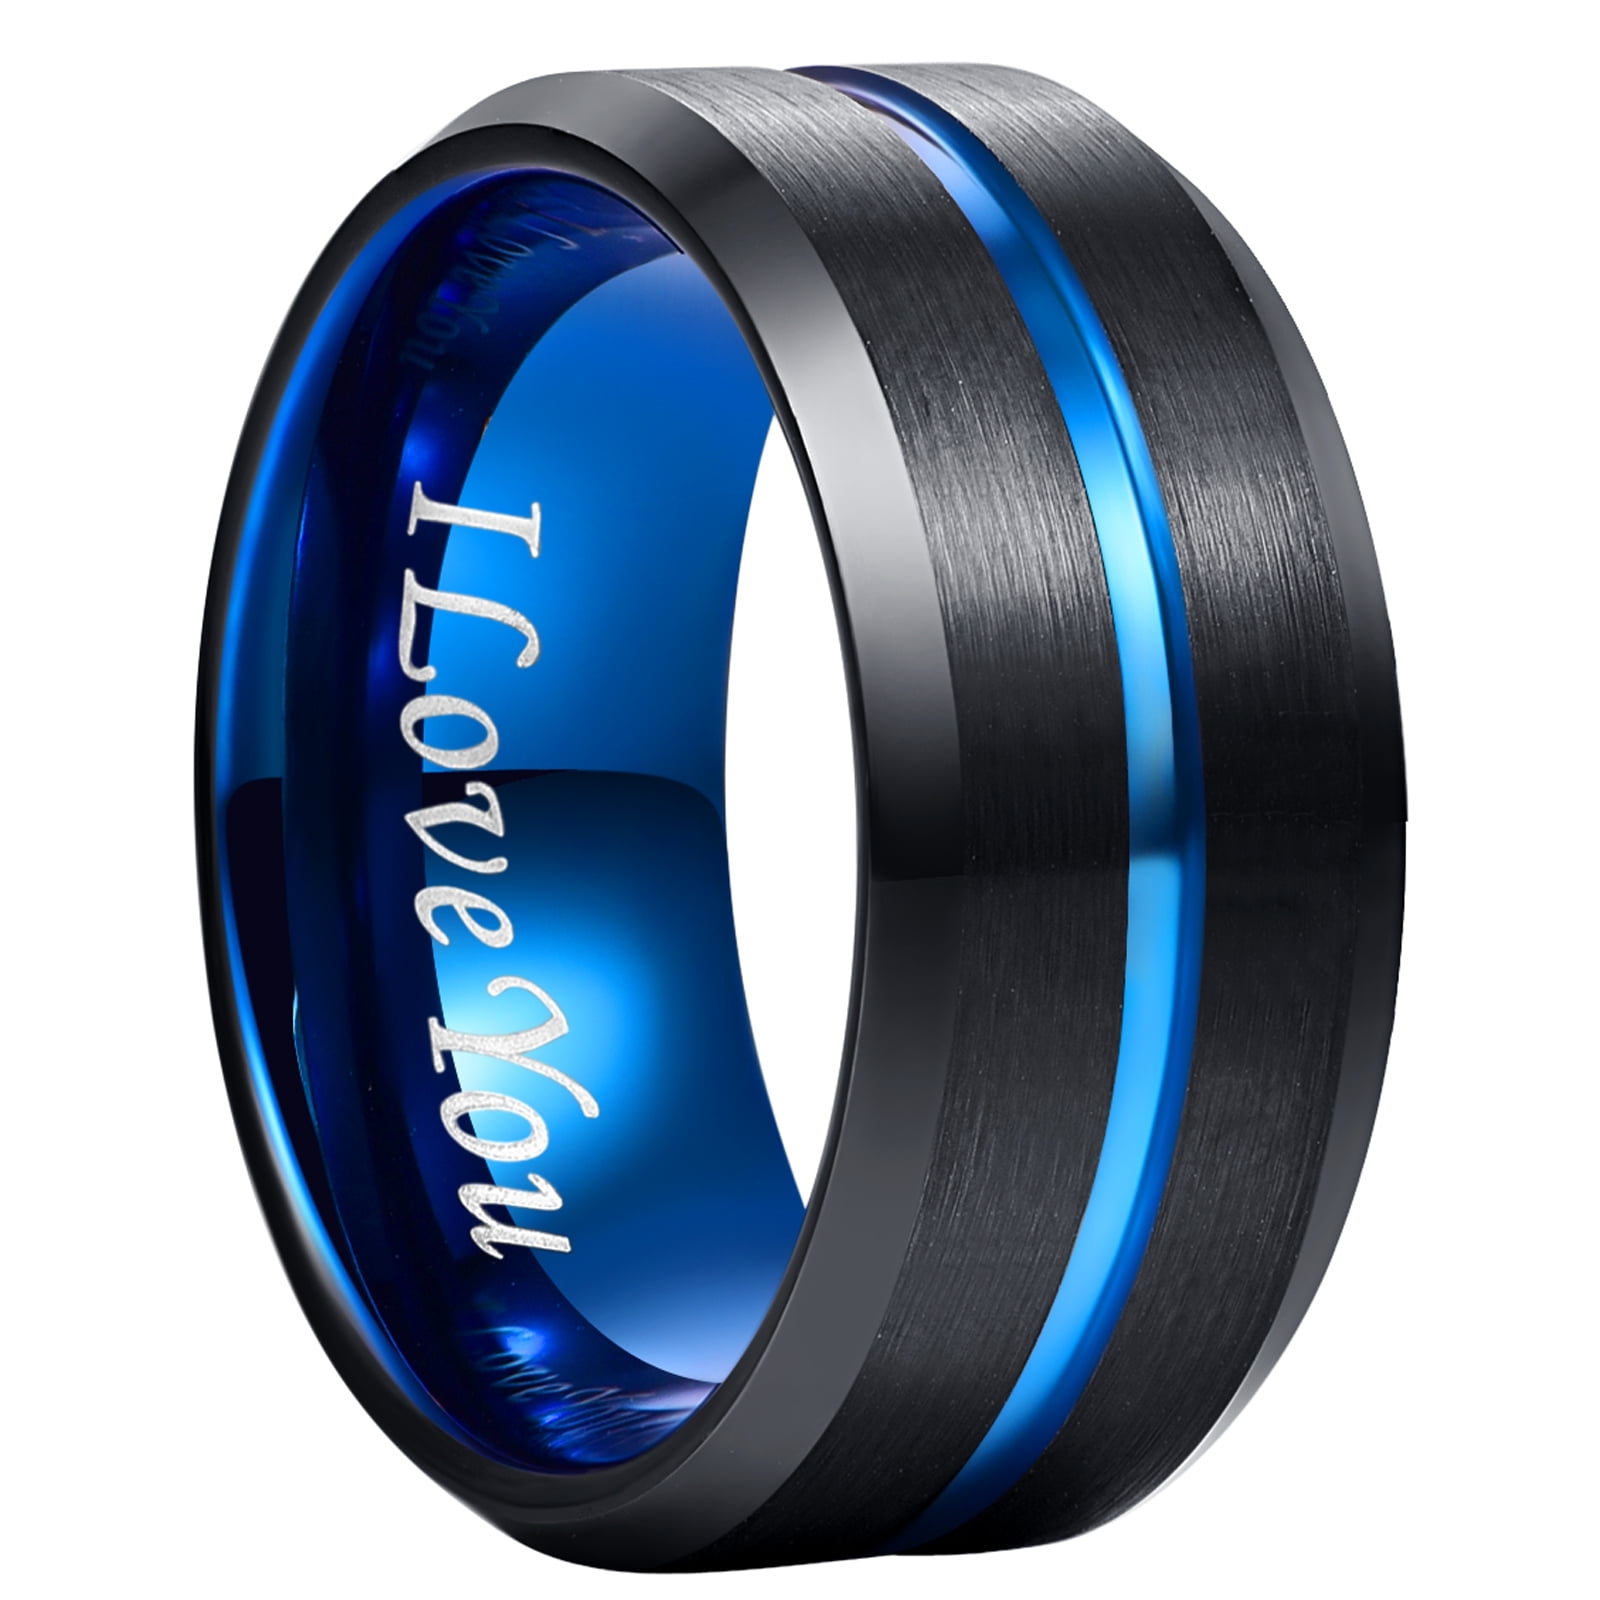 9 King Will Thin Red Groove Black Brushed Tungsten Carbide Wedding Band Ring Comfort Fit